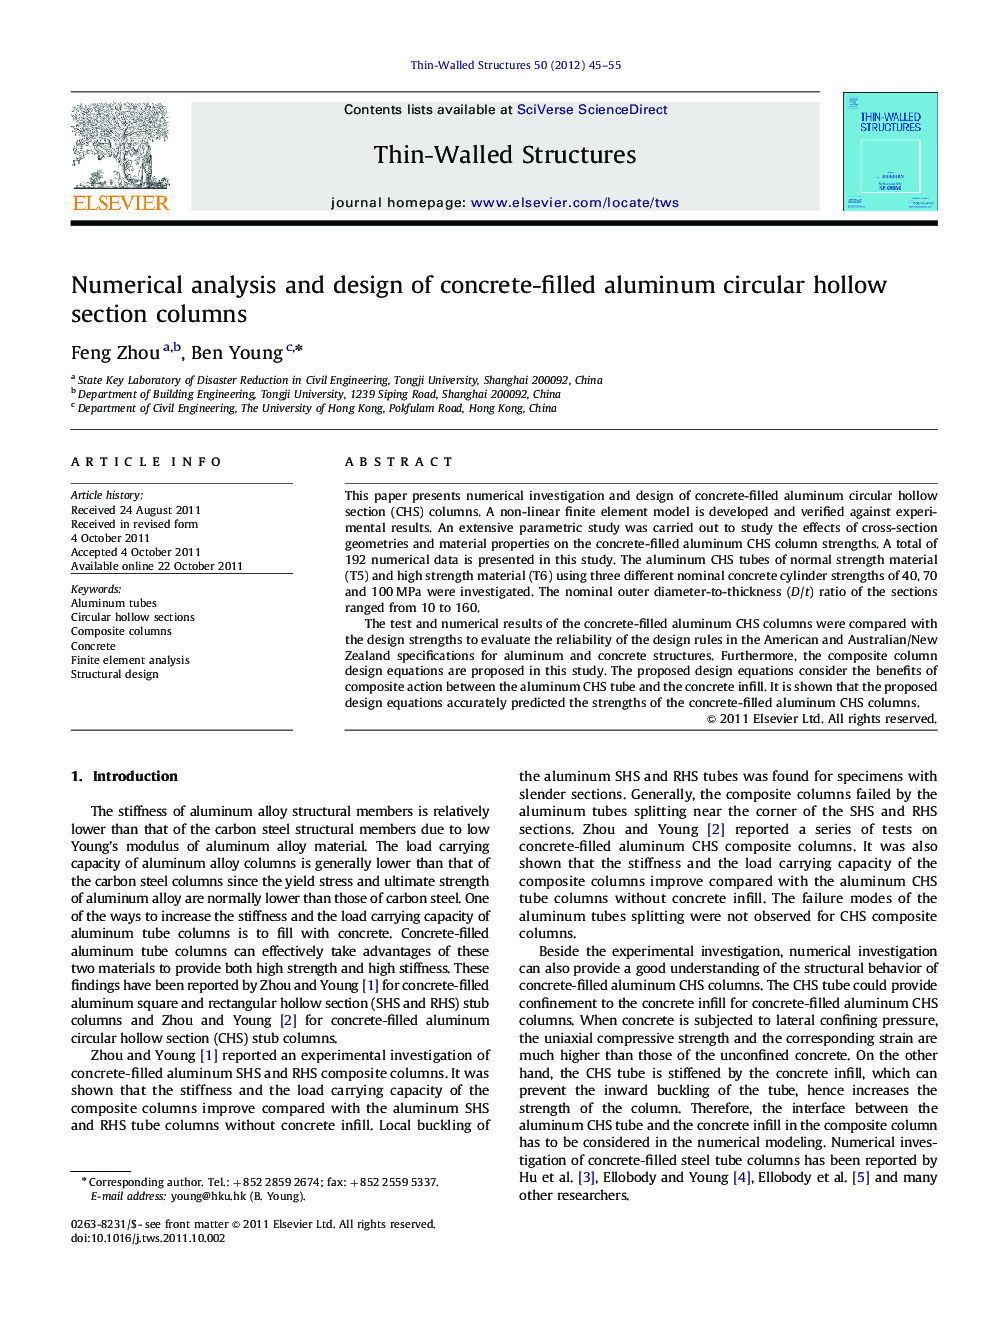 Numerical analysis and design of concrete-filled aluminum circular hollow section columns